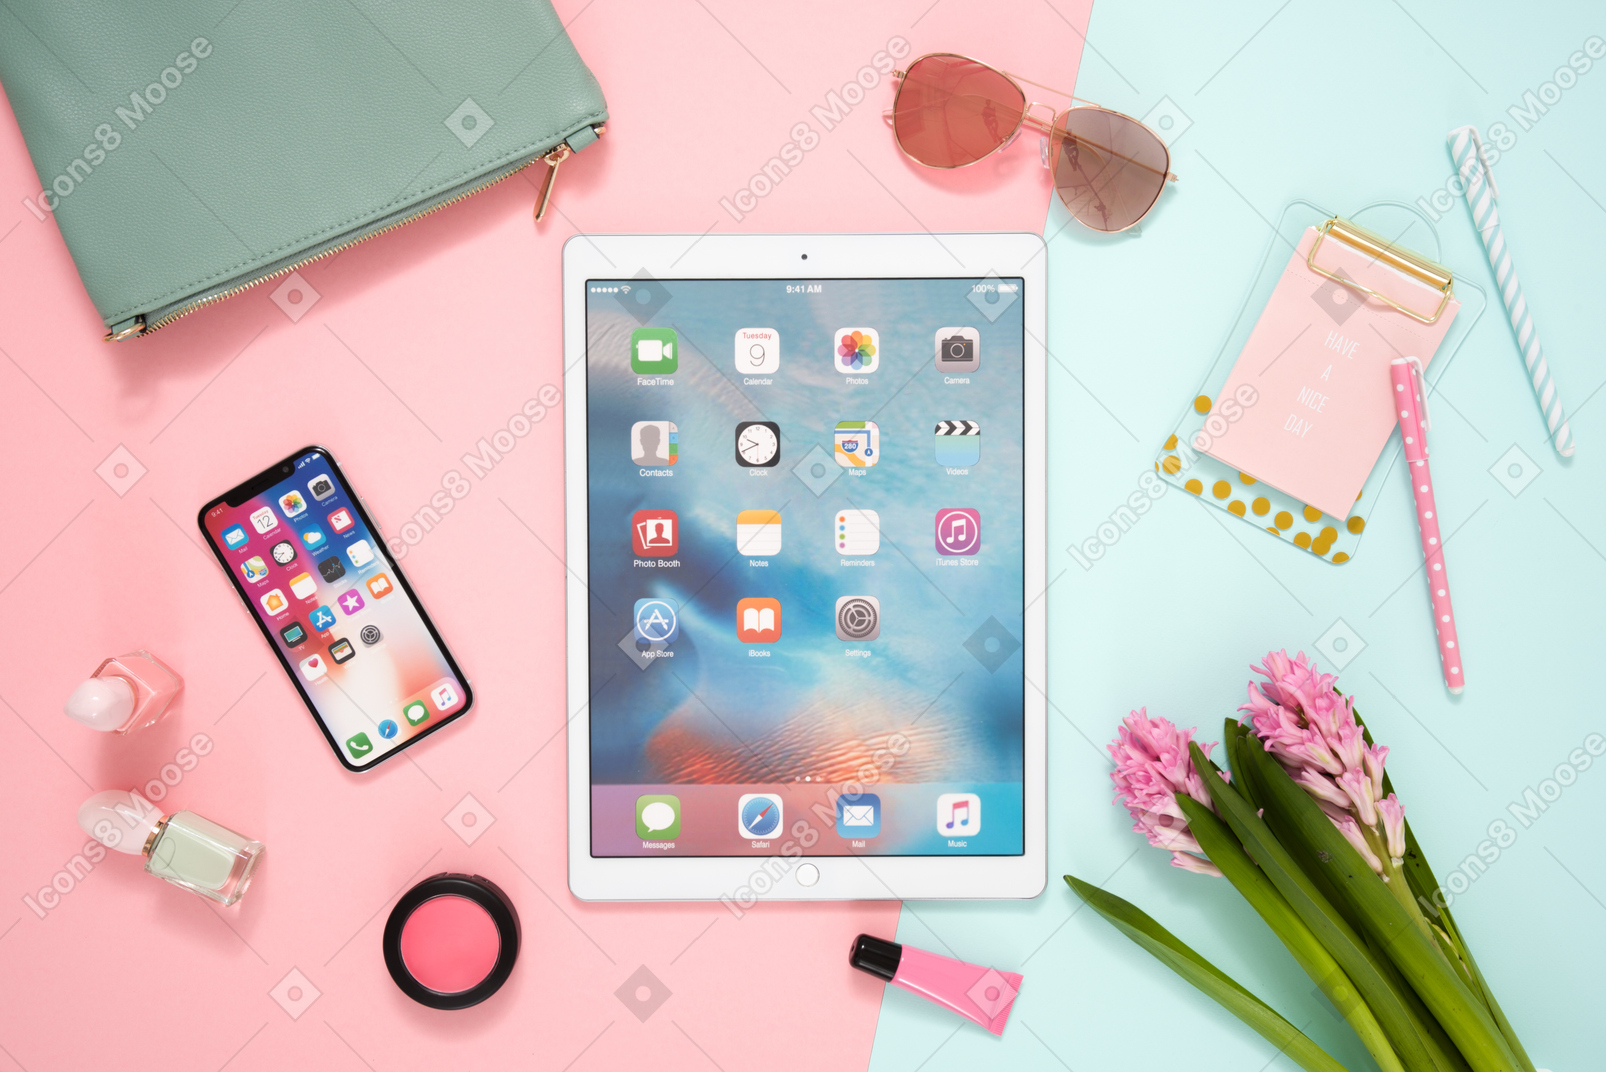 Desk of a modern woman: trendy devices, cosmetics, flowers